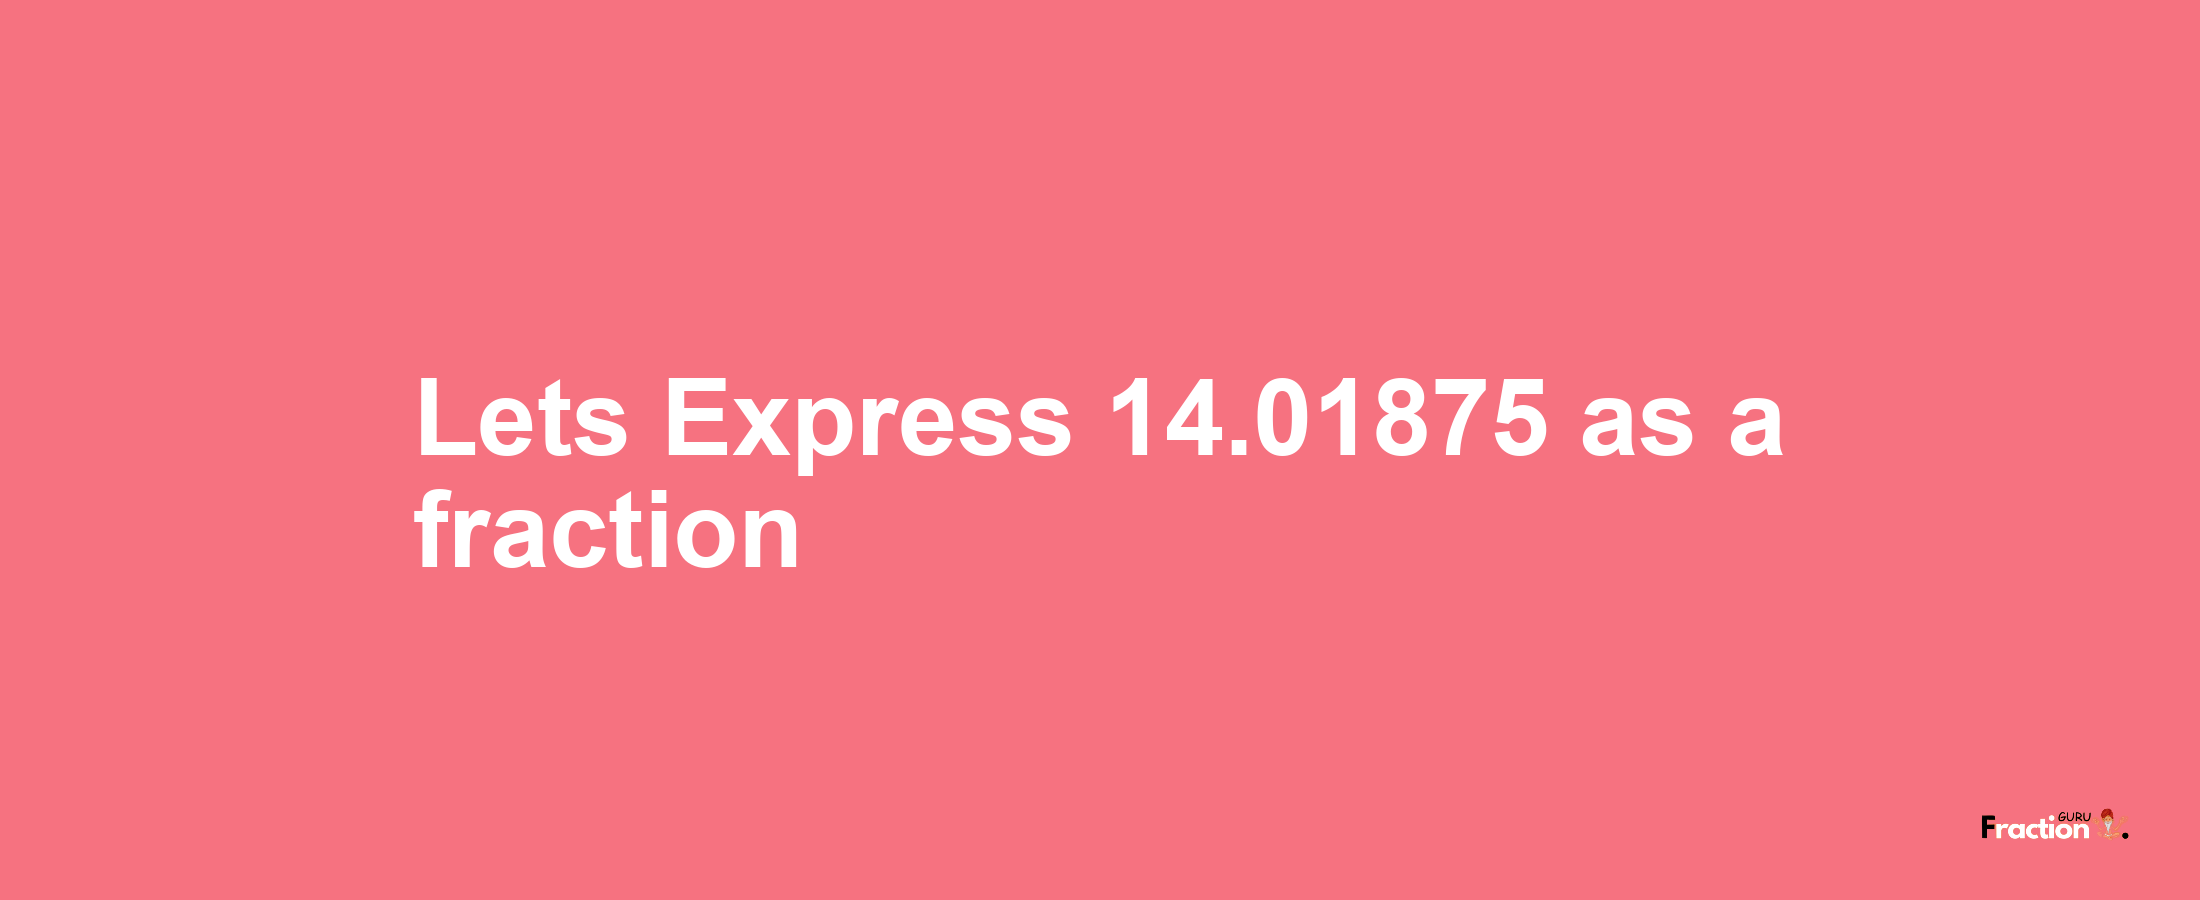 Lets Express 14.01875 as afraction